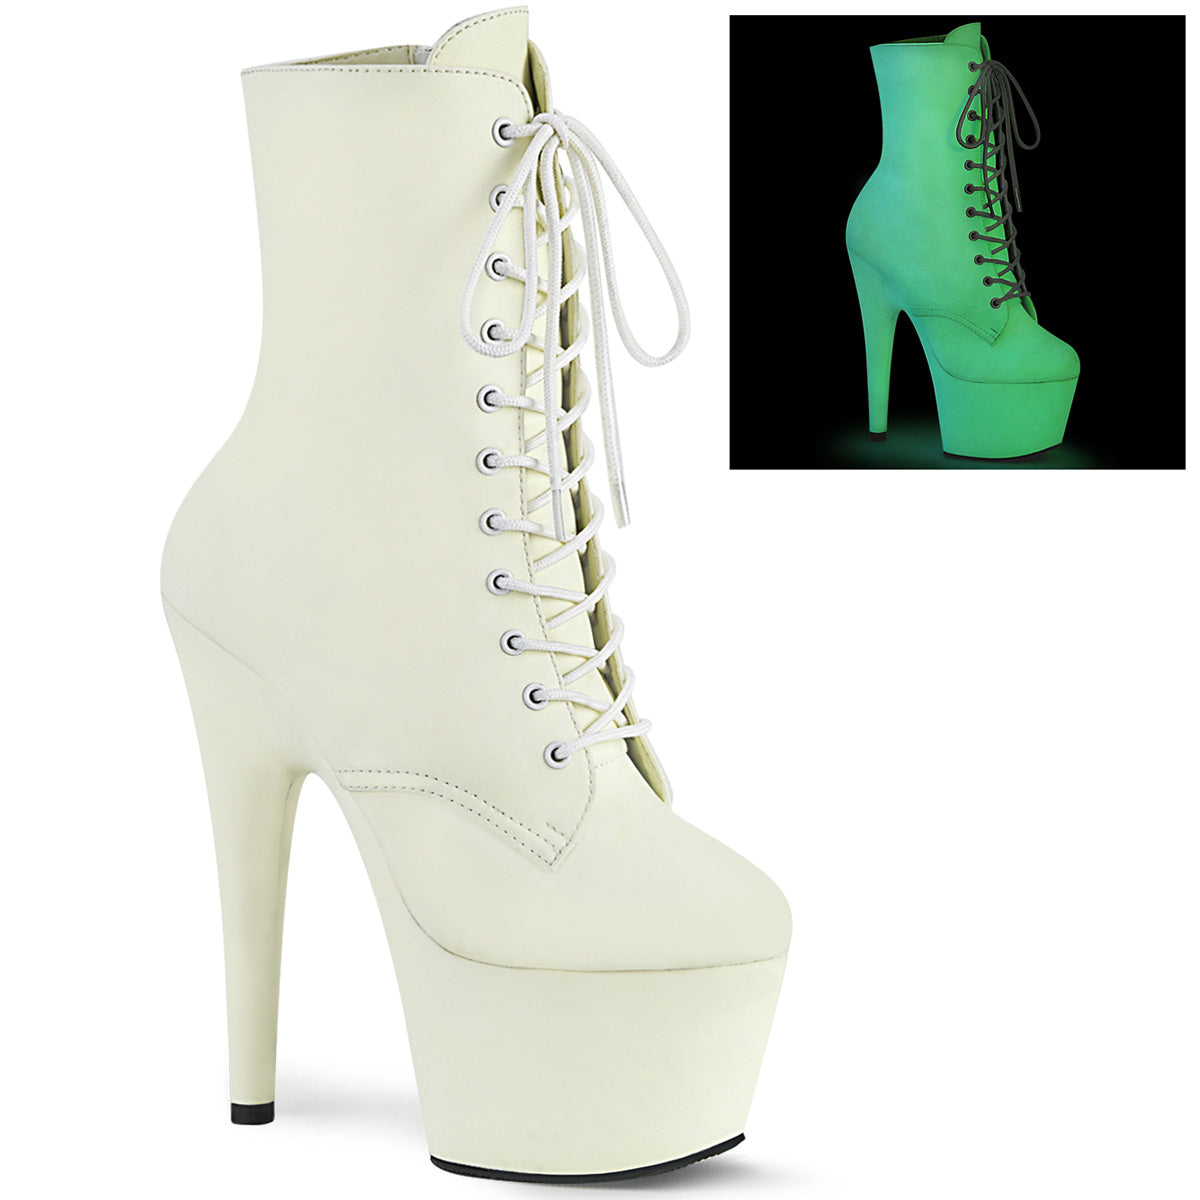 ADORE-1020GD Pleasers 7" Heel White UV Exotic Dancer Ankle Boots